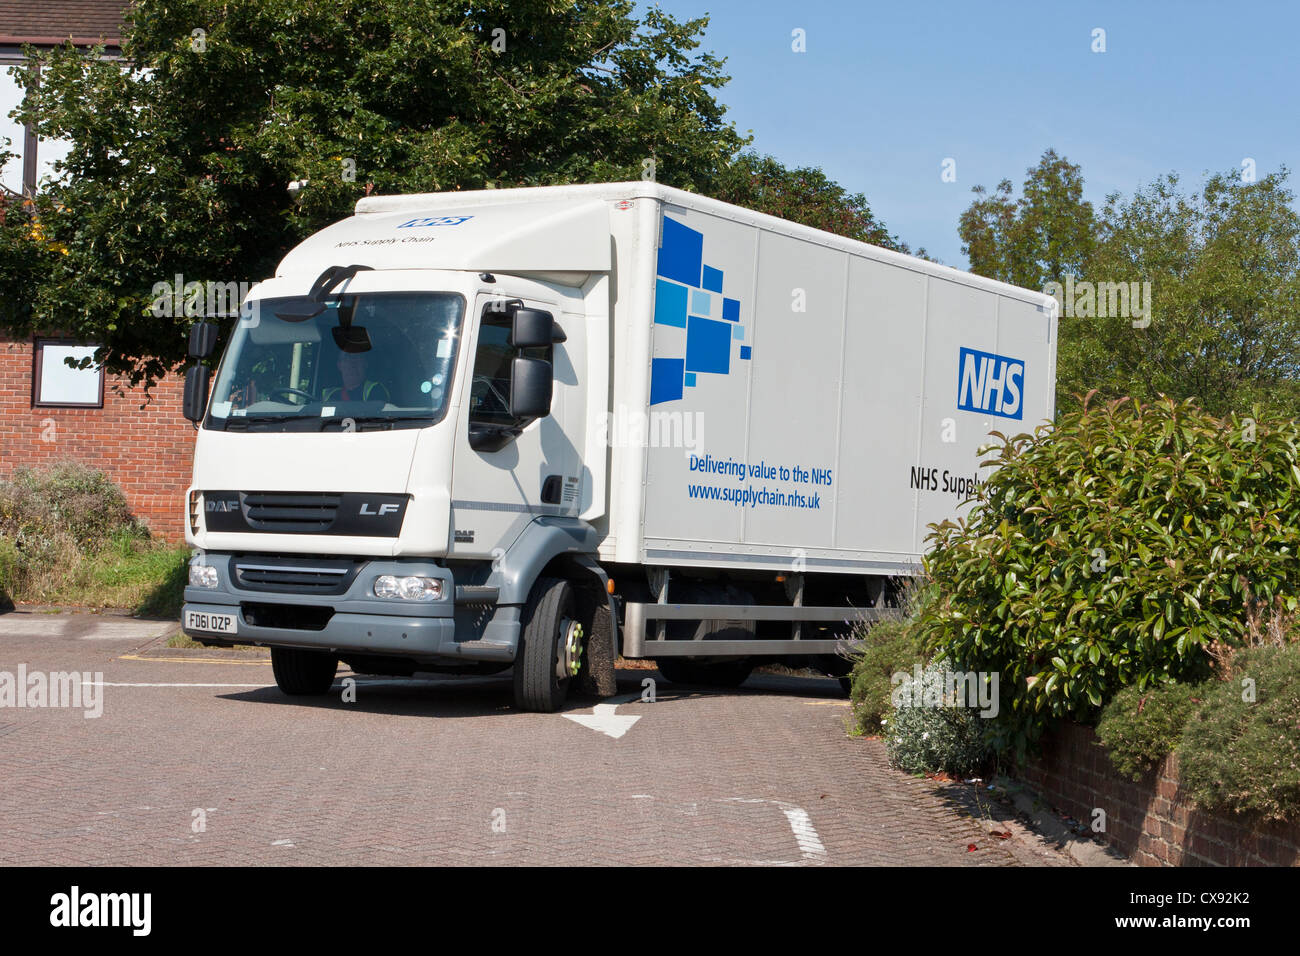 A supply vehicle leaves a GP surgery following a delivery. Part of the NHS - National Health Service - supply chain. Stock Photo